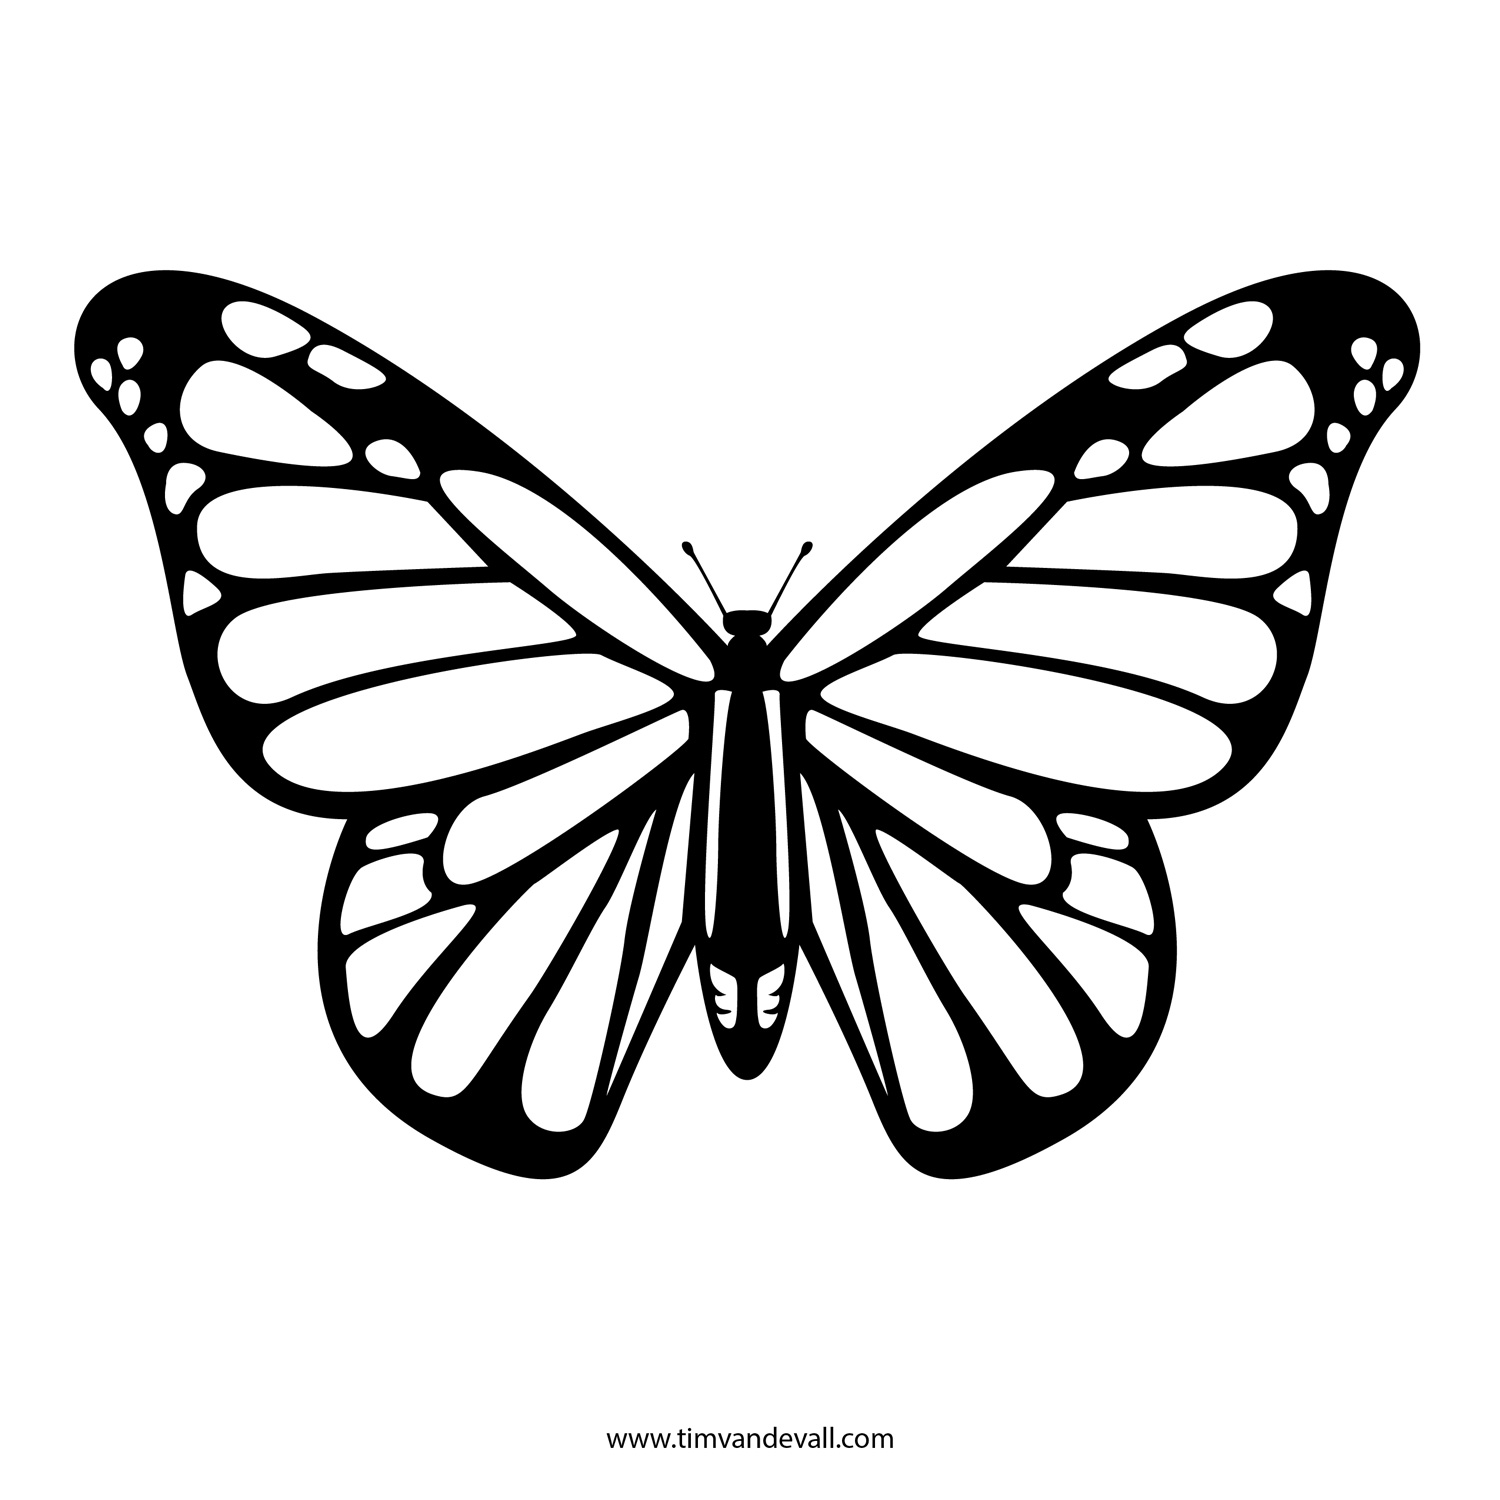 These Free Printable Picture Of A Butterfly | mackira-thanatos